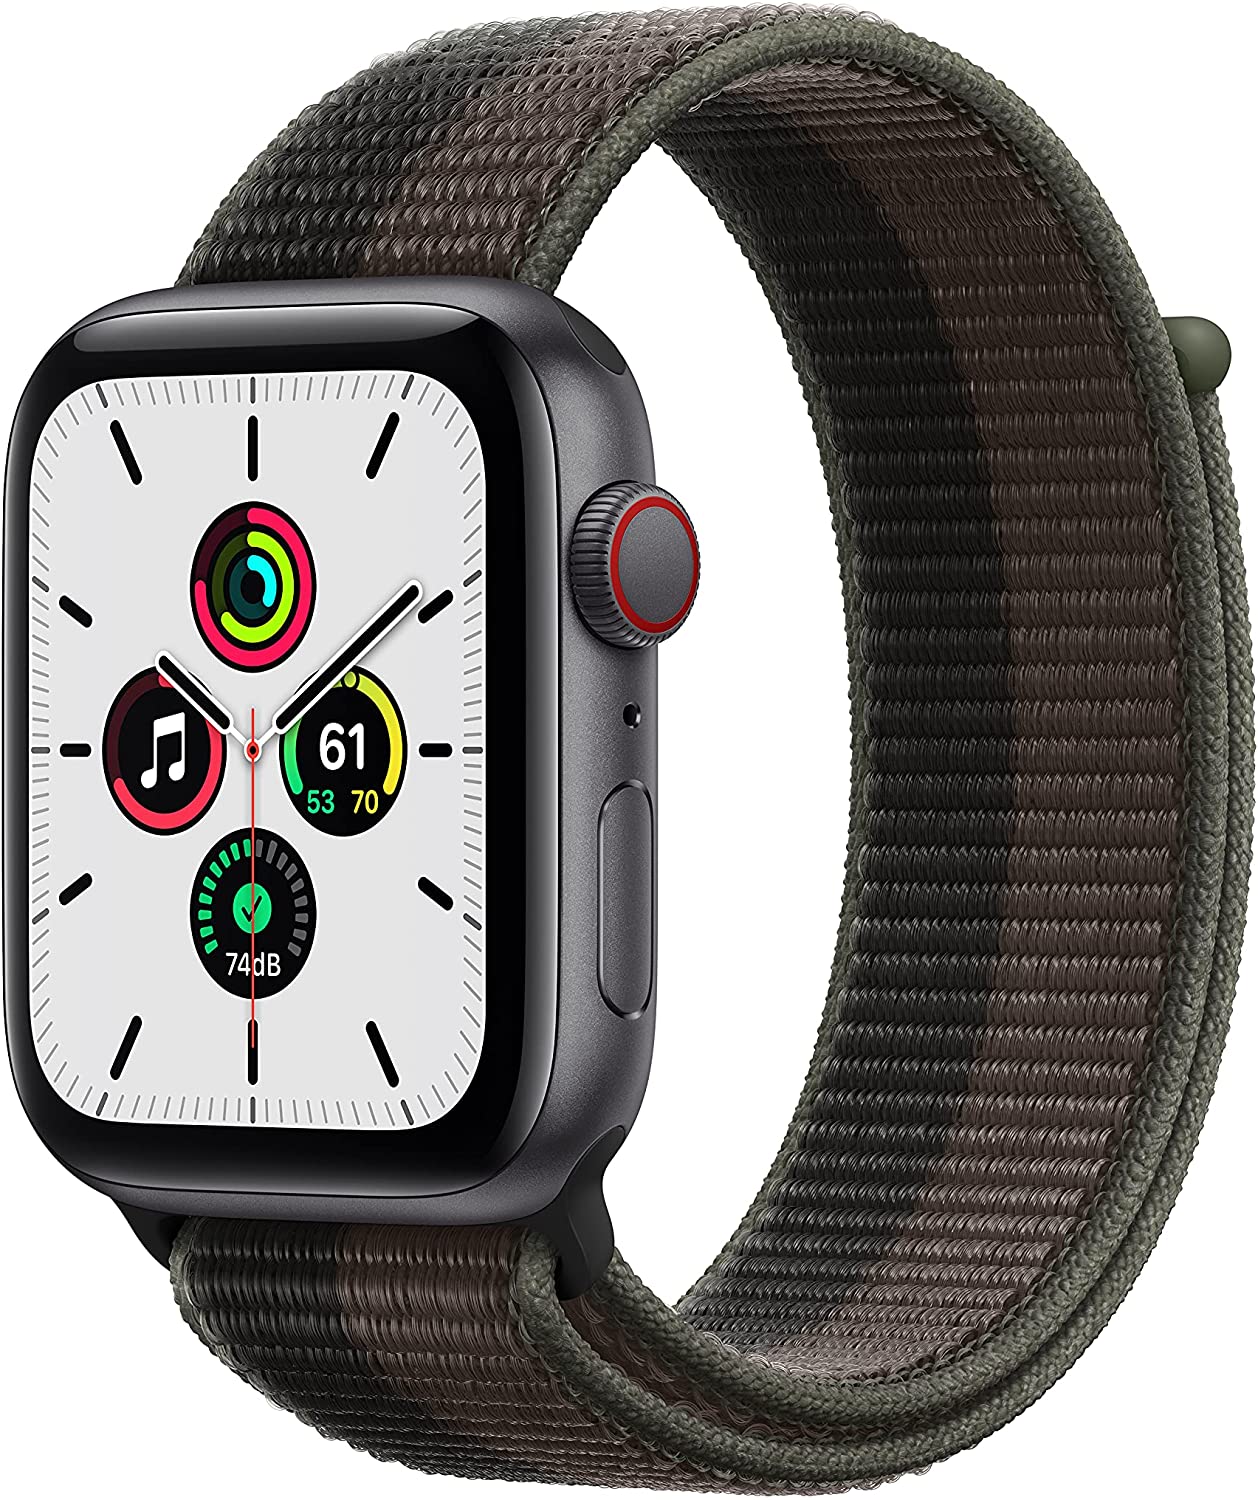 Apple Watch SE GPS + Cellular, 44mm Space Gray Aluminum Case with Tornado/Gray Sport Loop